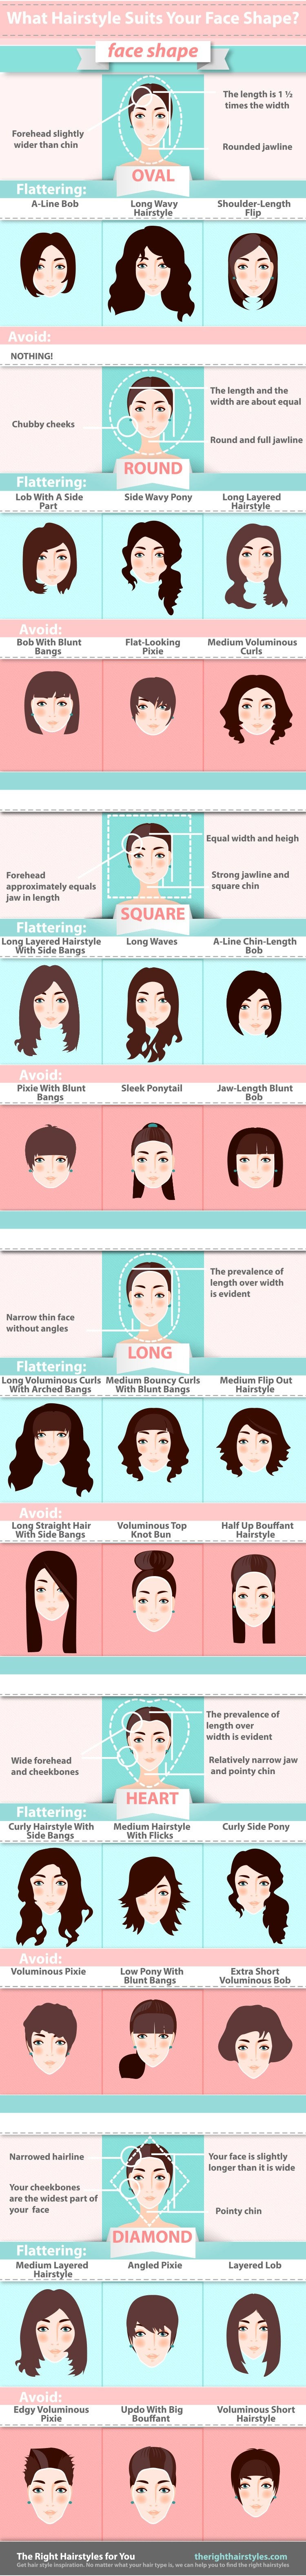 Co Hairstyle Suits Your Face Shape